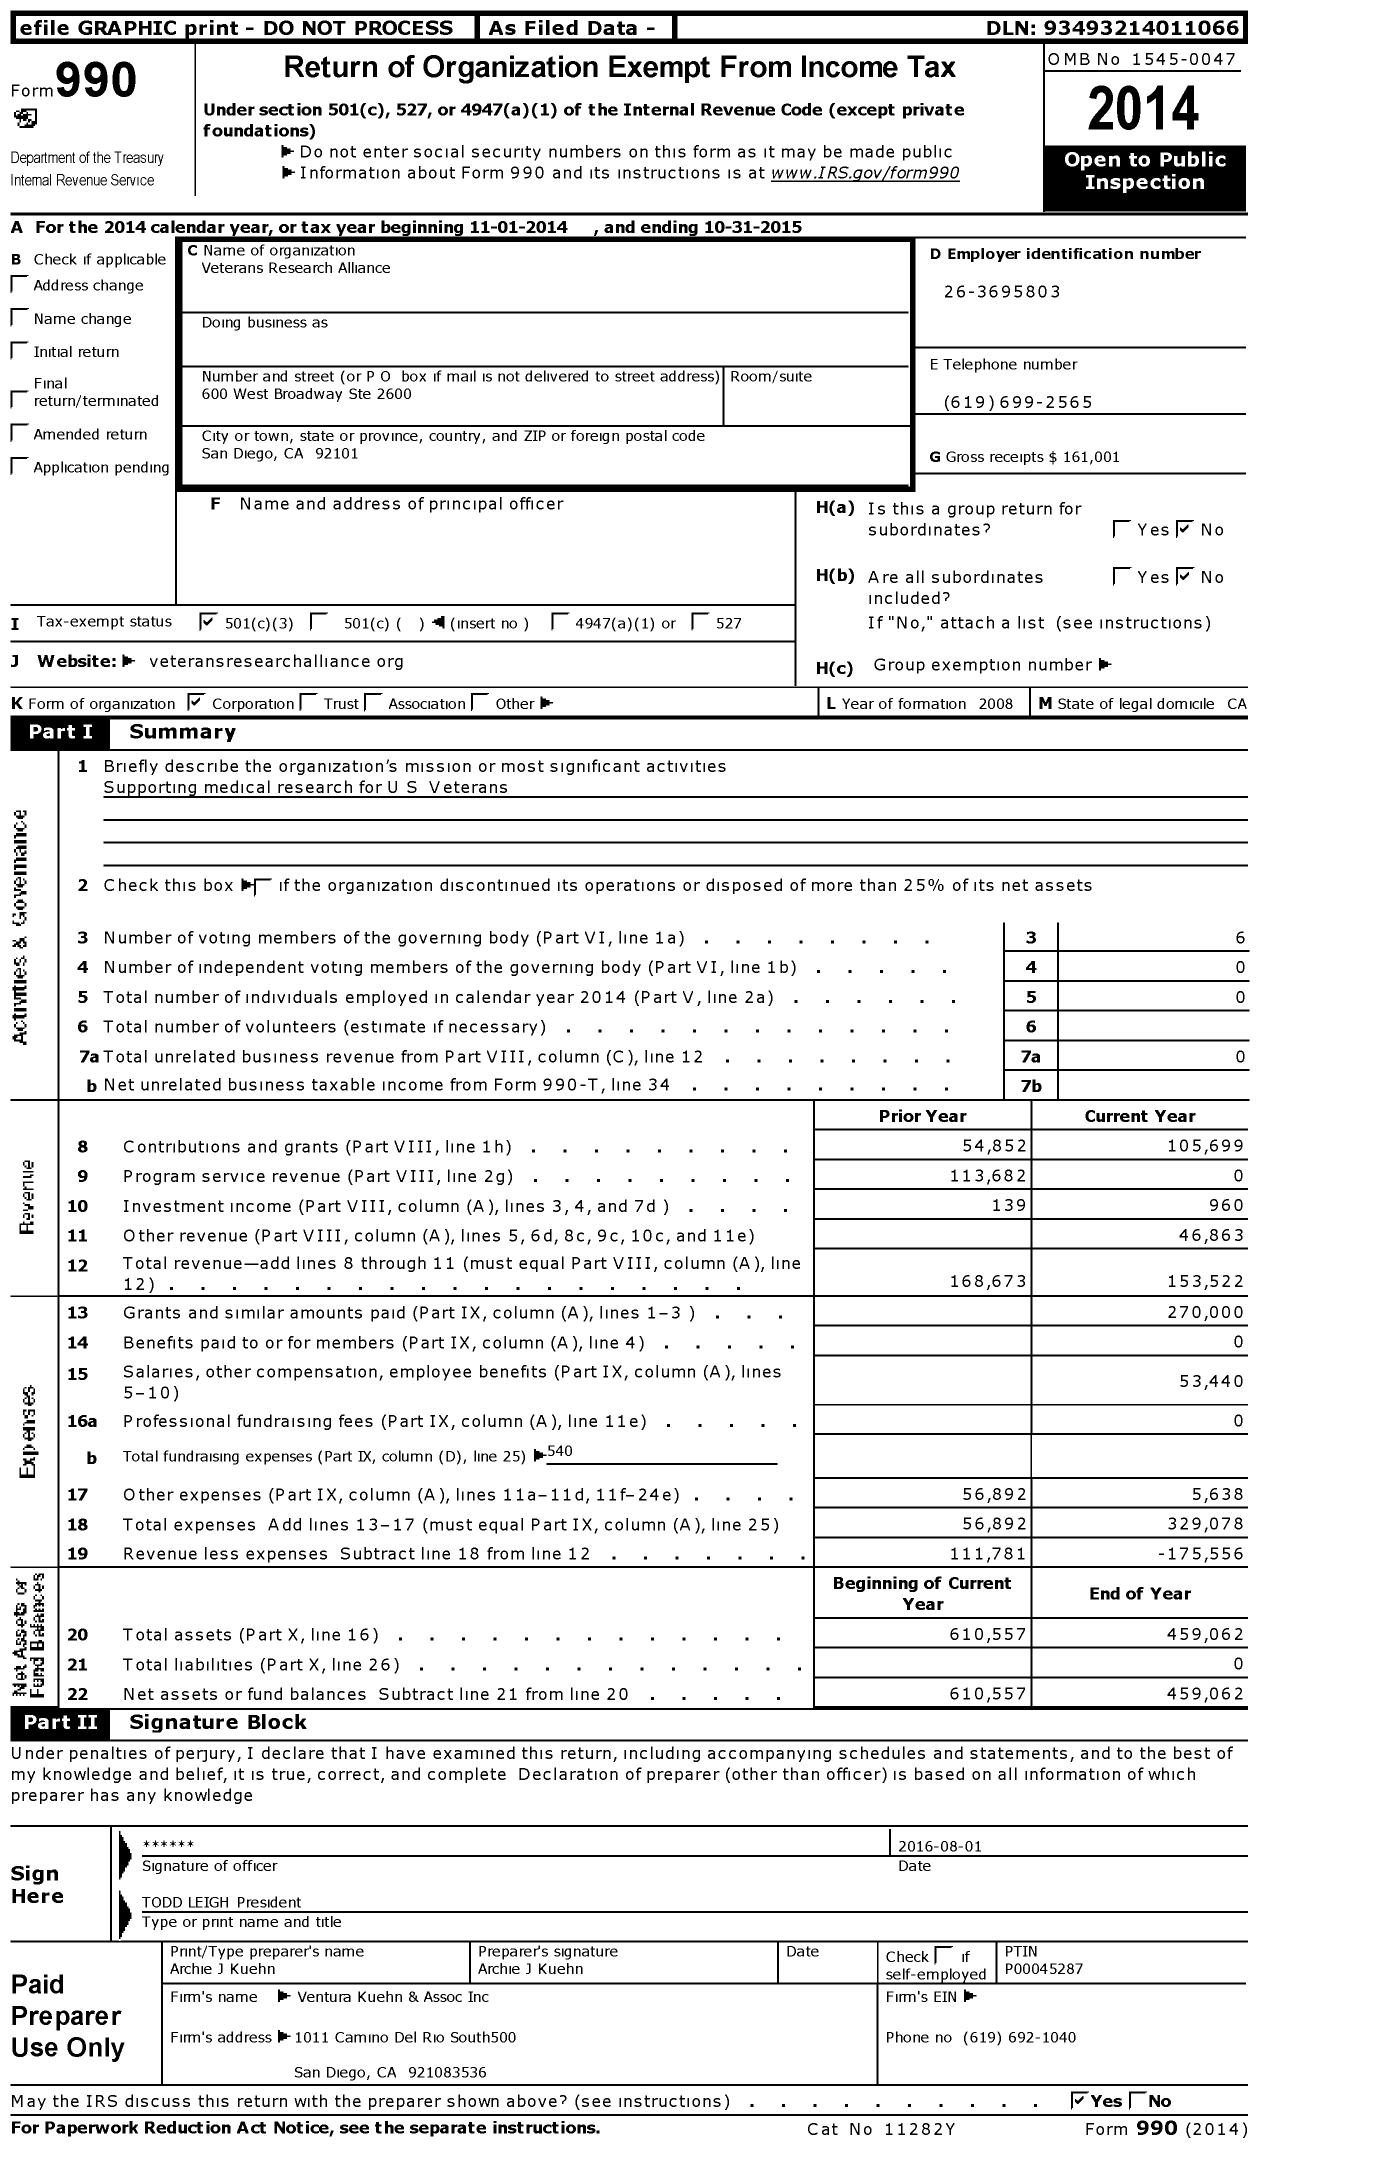 Image of first page of 2014 Form 990 for Veterans Research Alliance